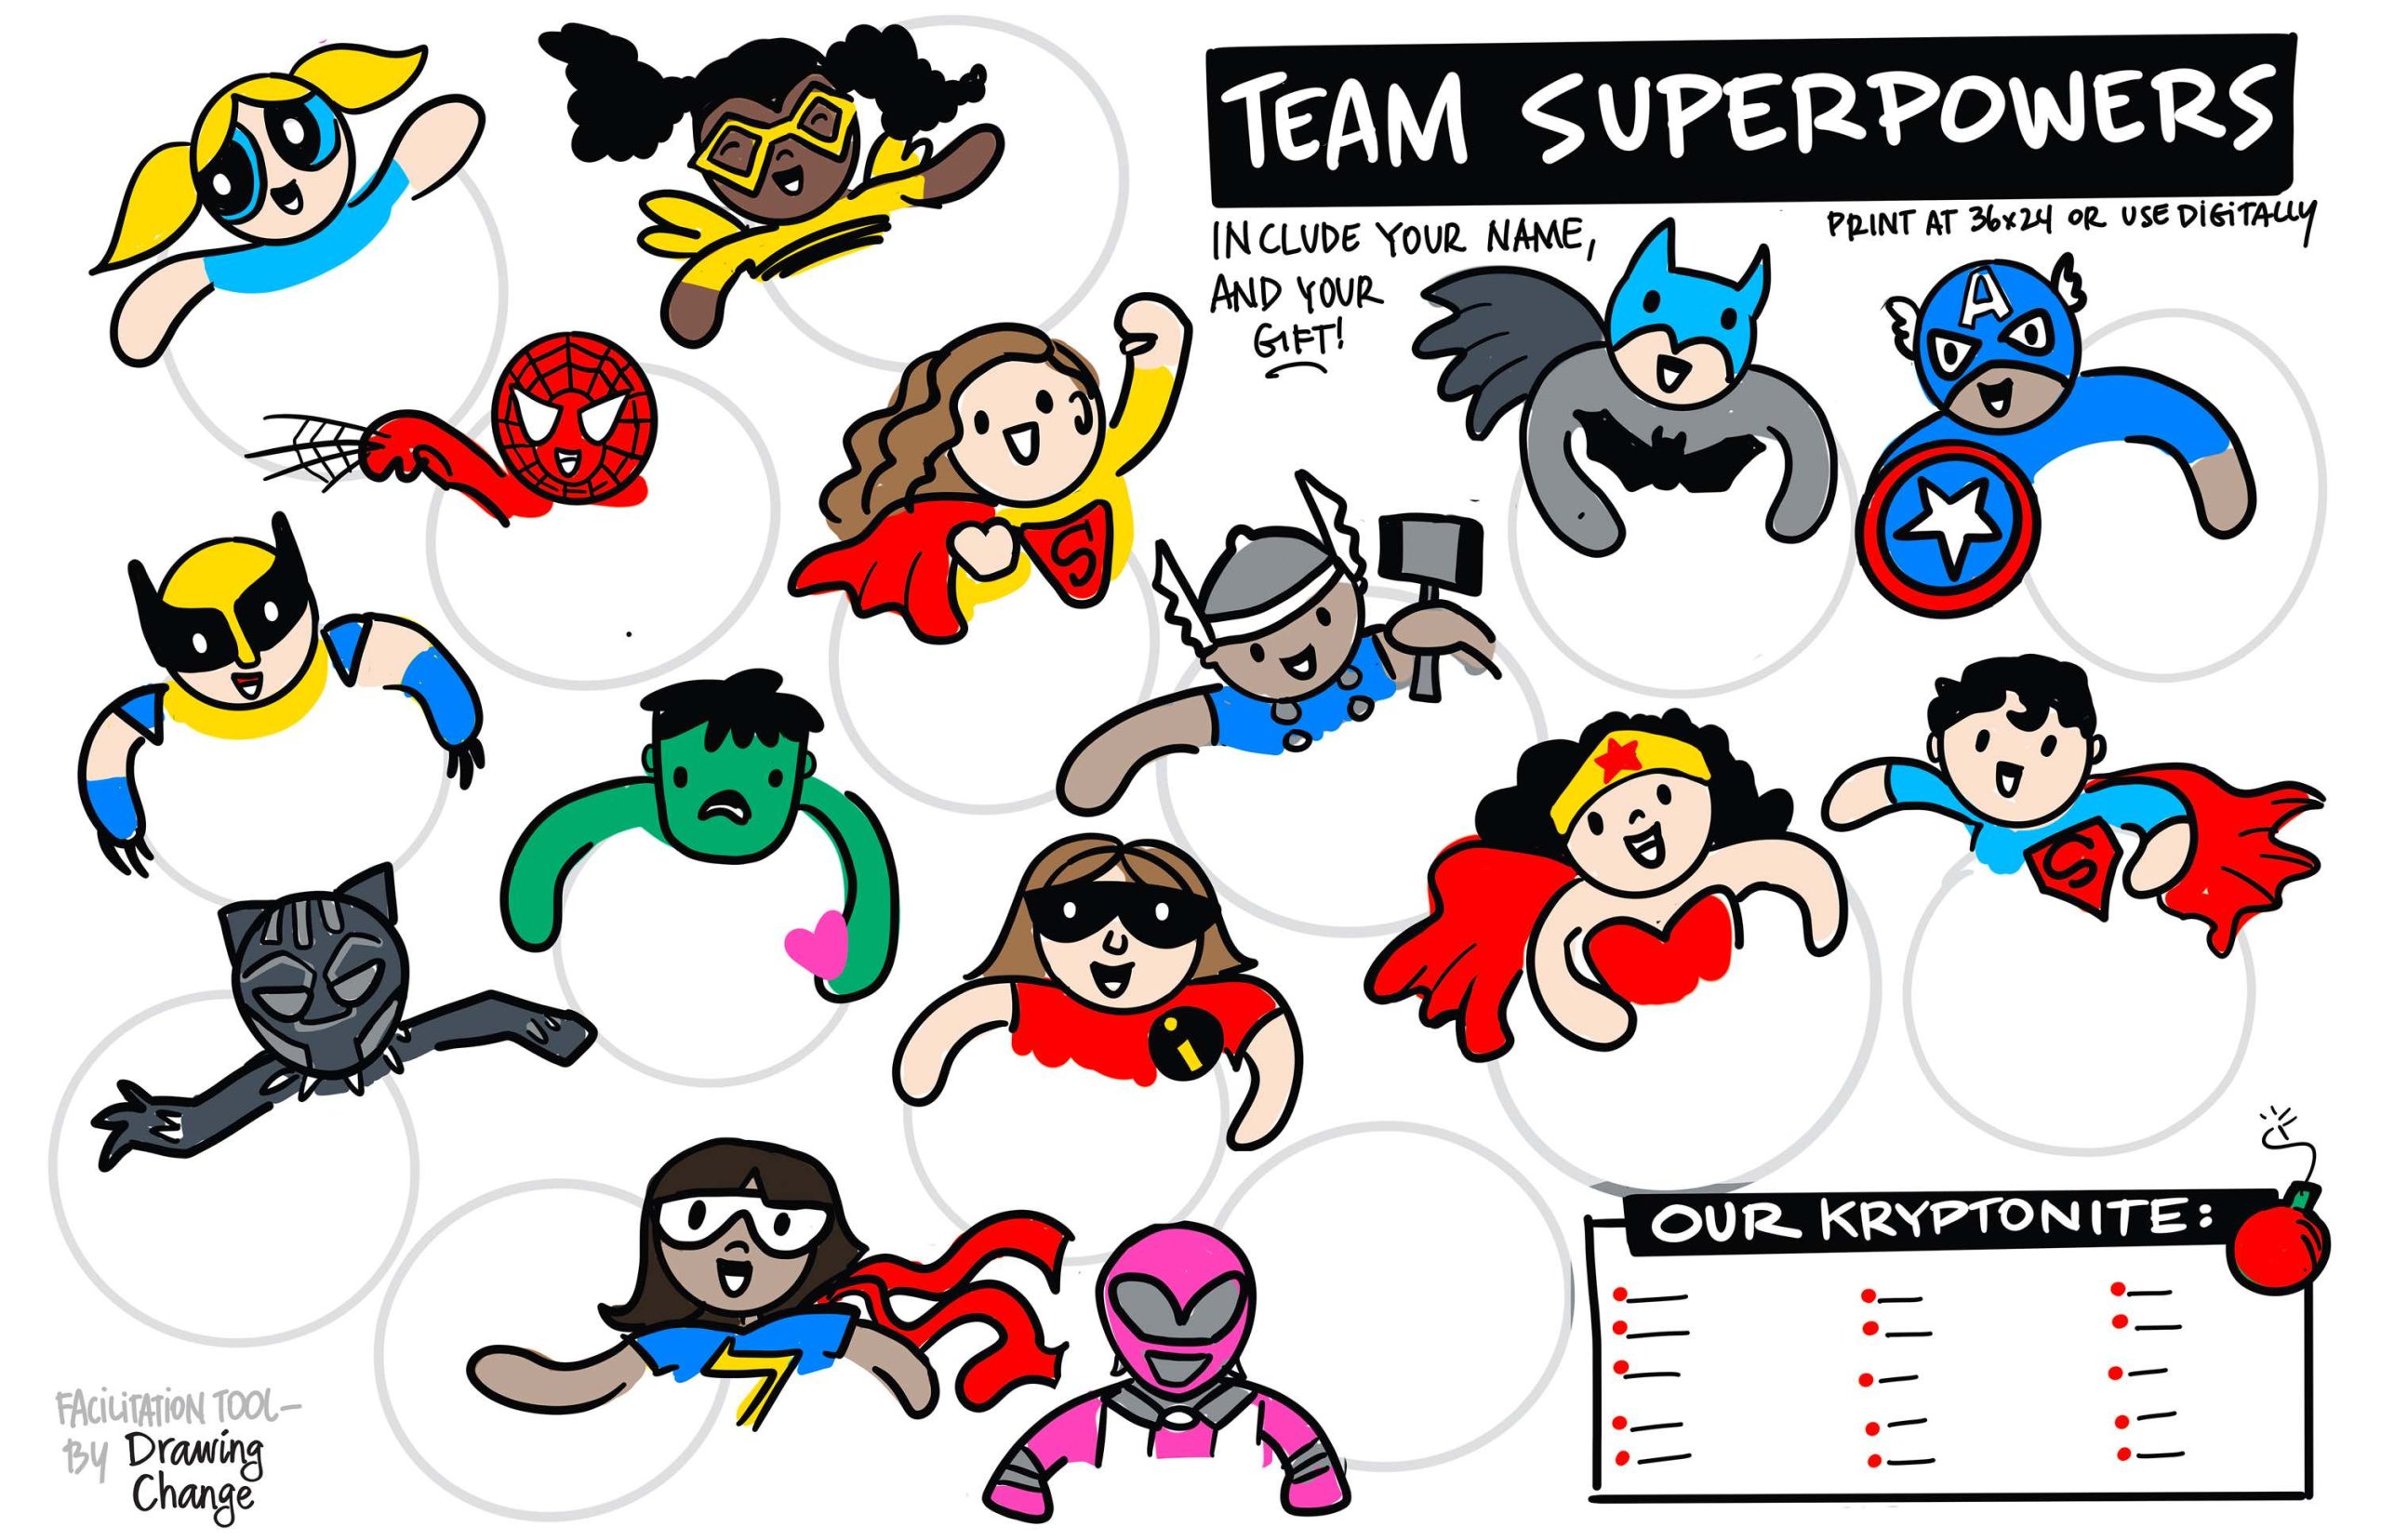 What are your super powers? what is your kryptonite? graphic facilitation template - by drawing change